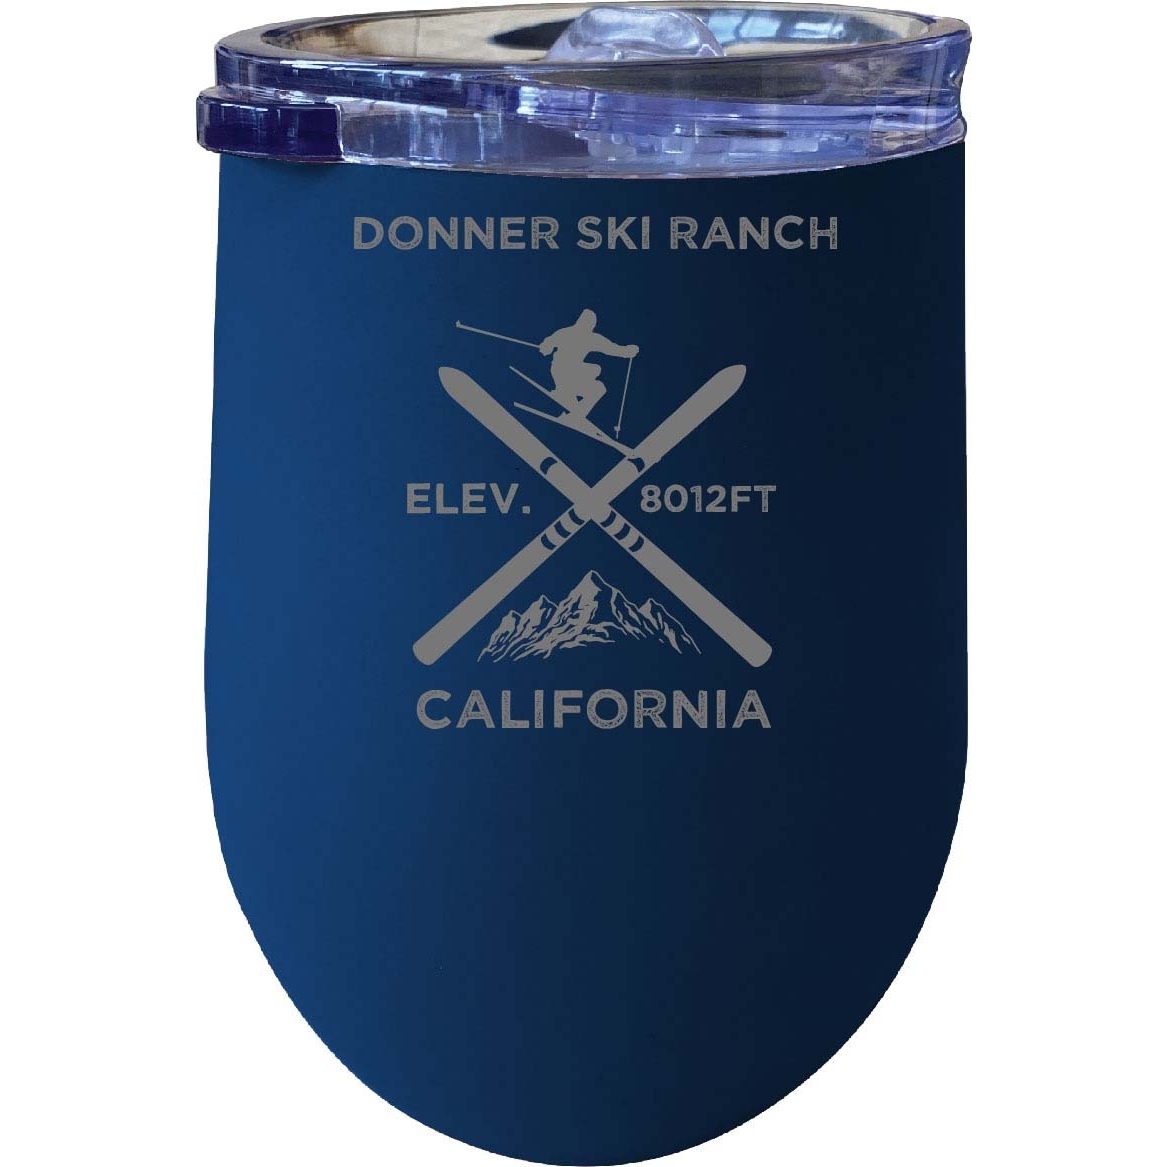 Donner Ski Ranch California Ski Souvenir 12 Oz Laser Etched Insulated Wine Stainless Steel Tumbler - Coral